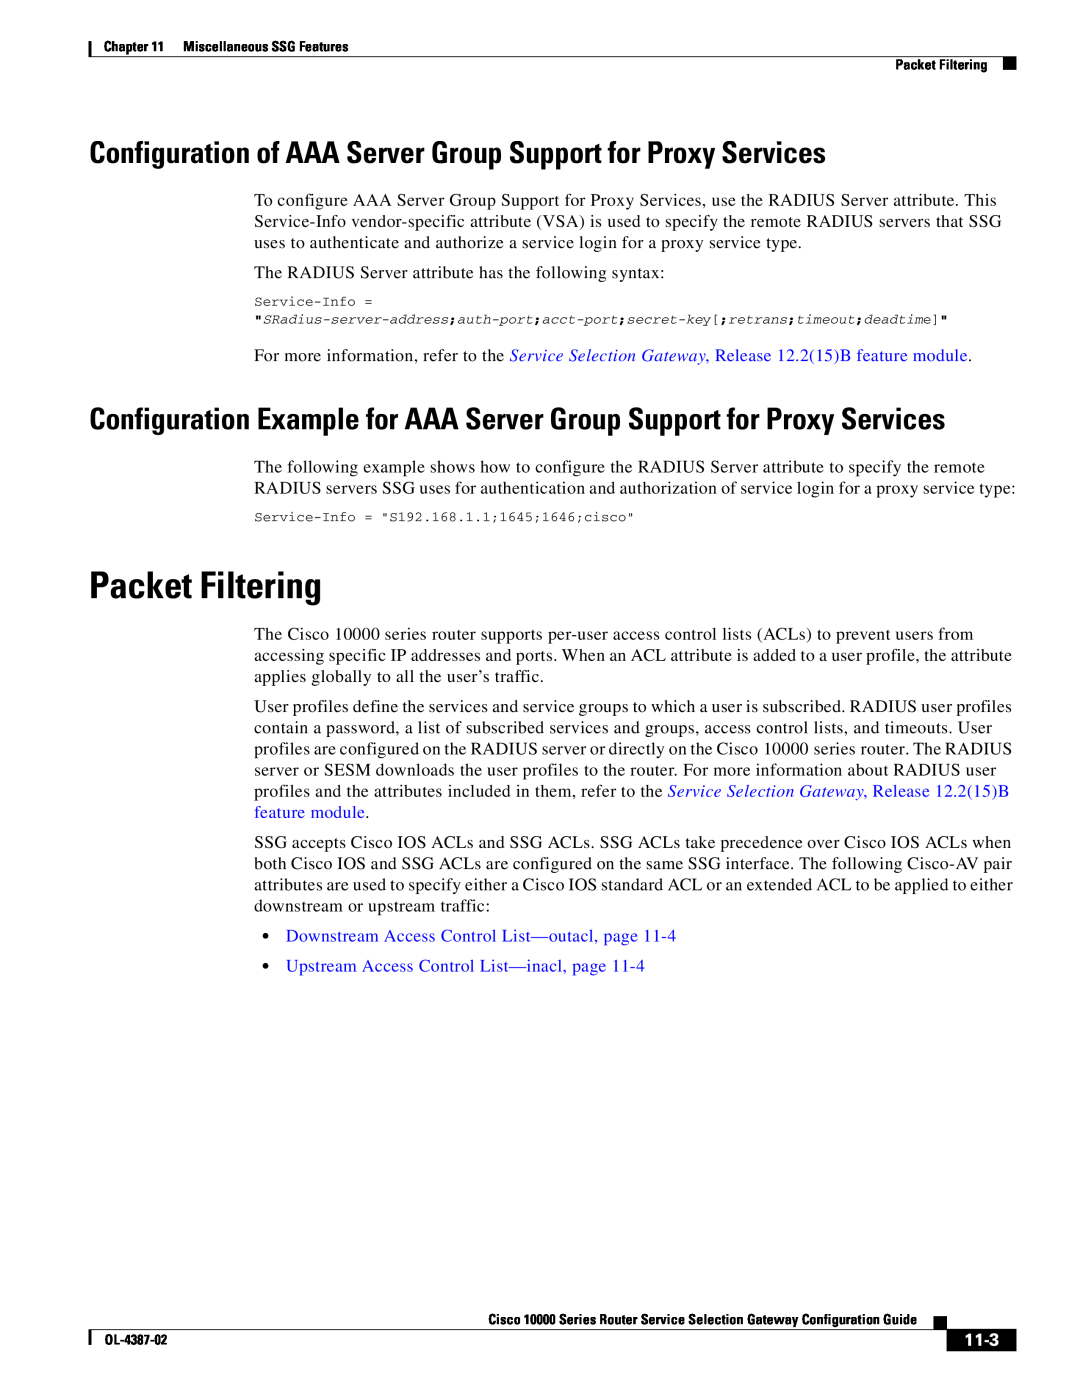 Cisco Systems OL-4387-02 manual Packet Filtering, Configuration of AAA Server Group Support for Proxy Services, 11-3 